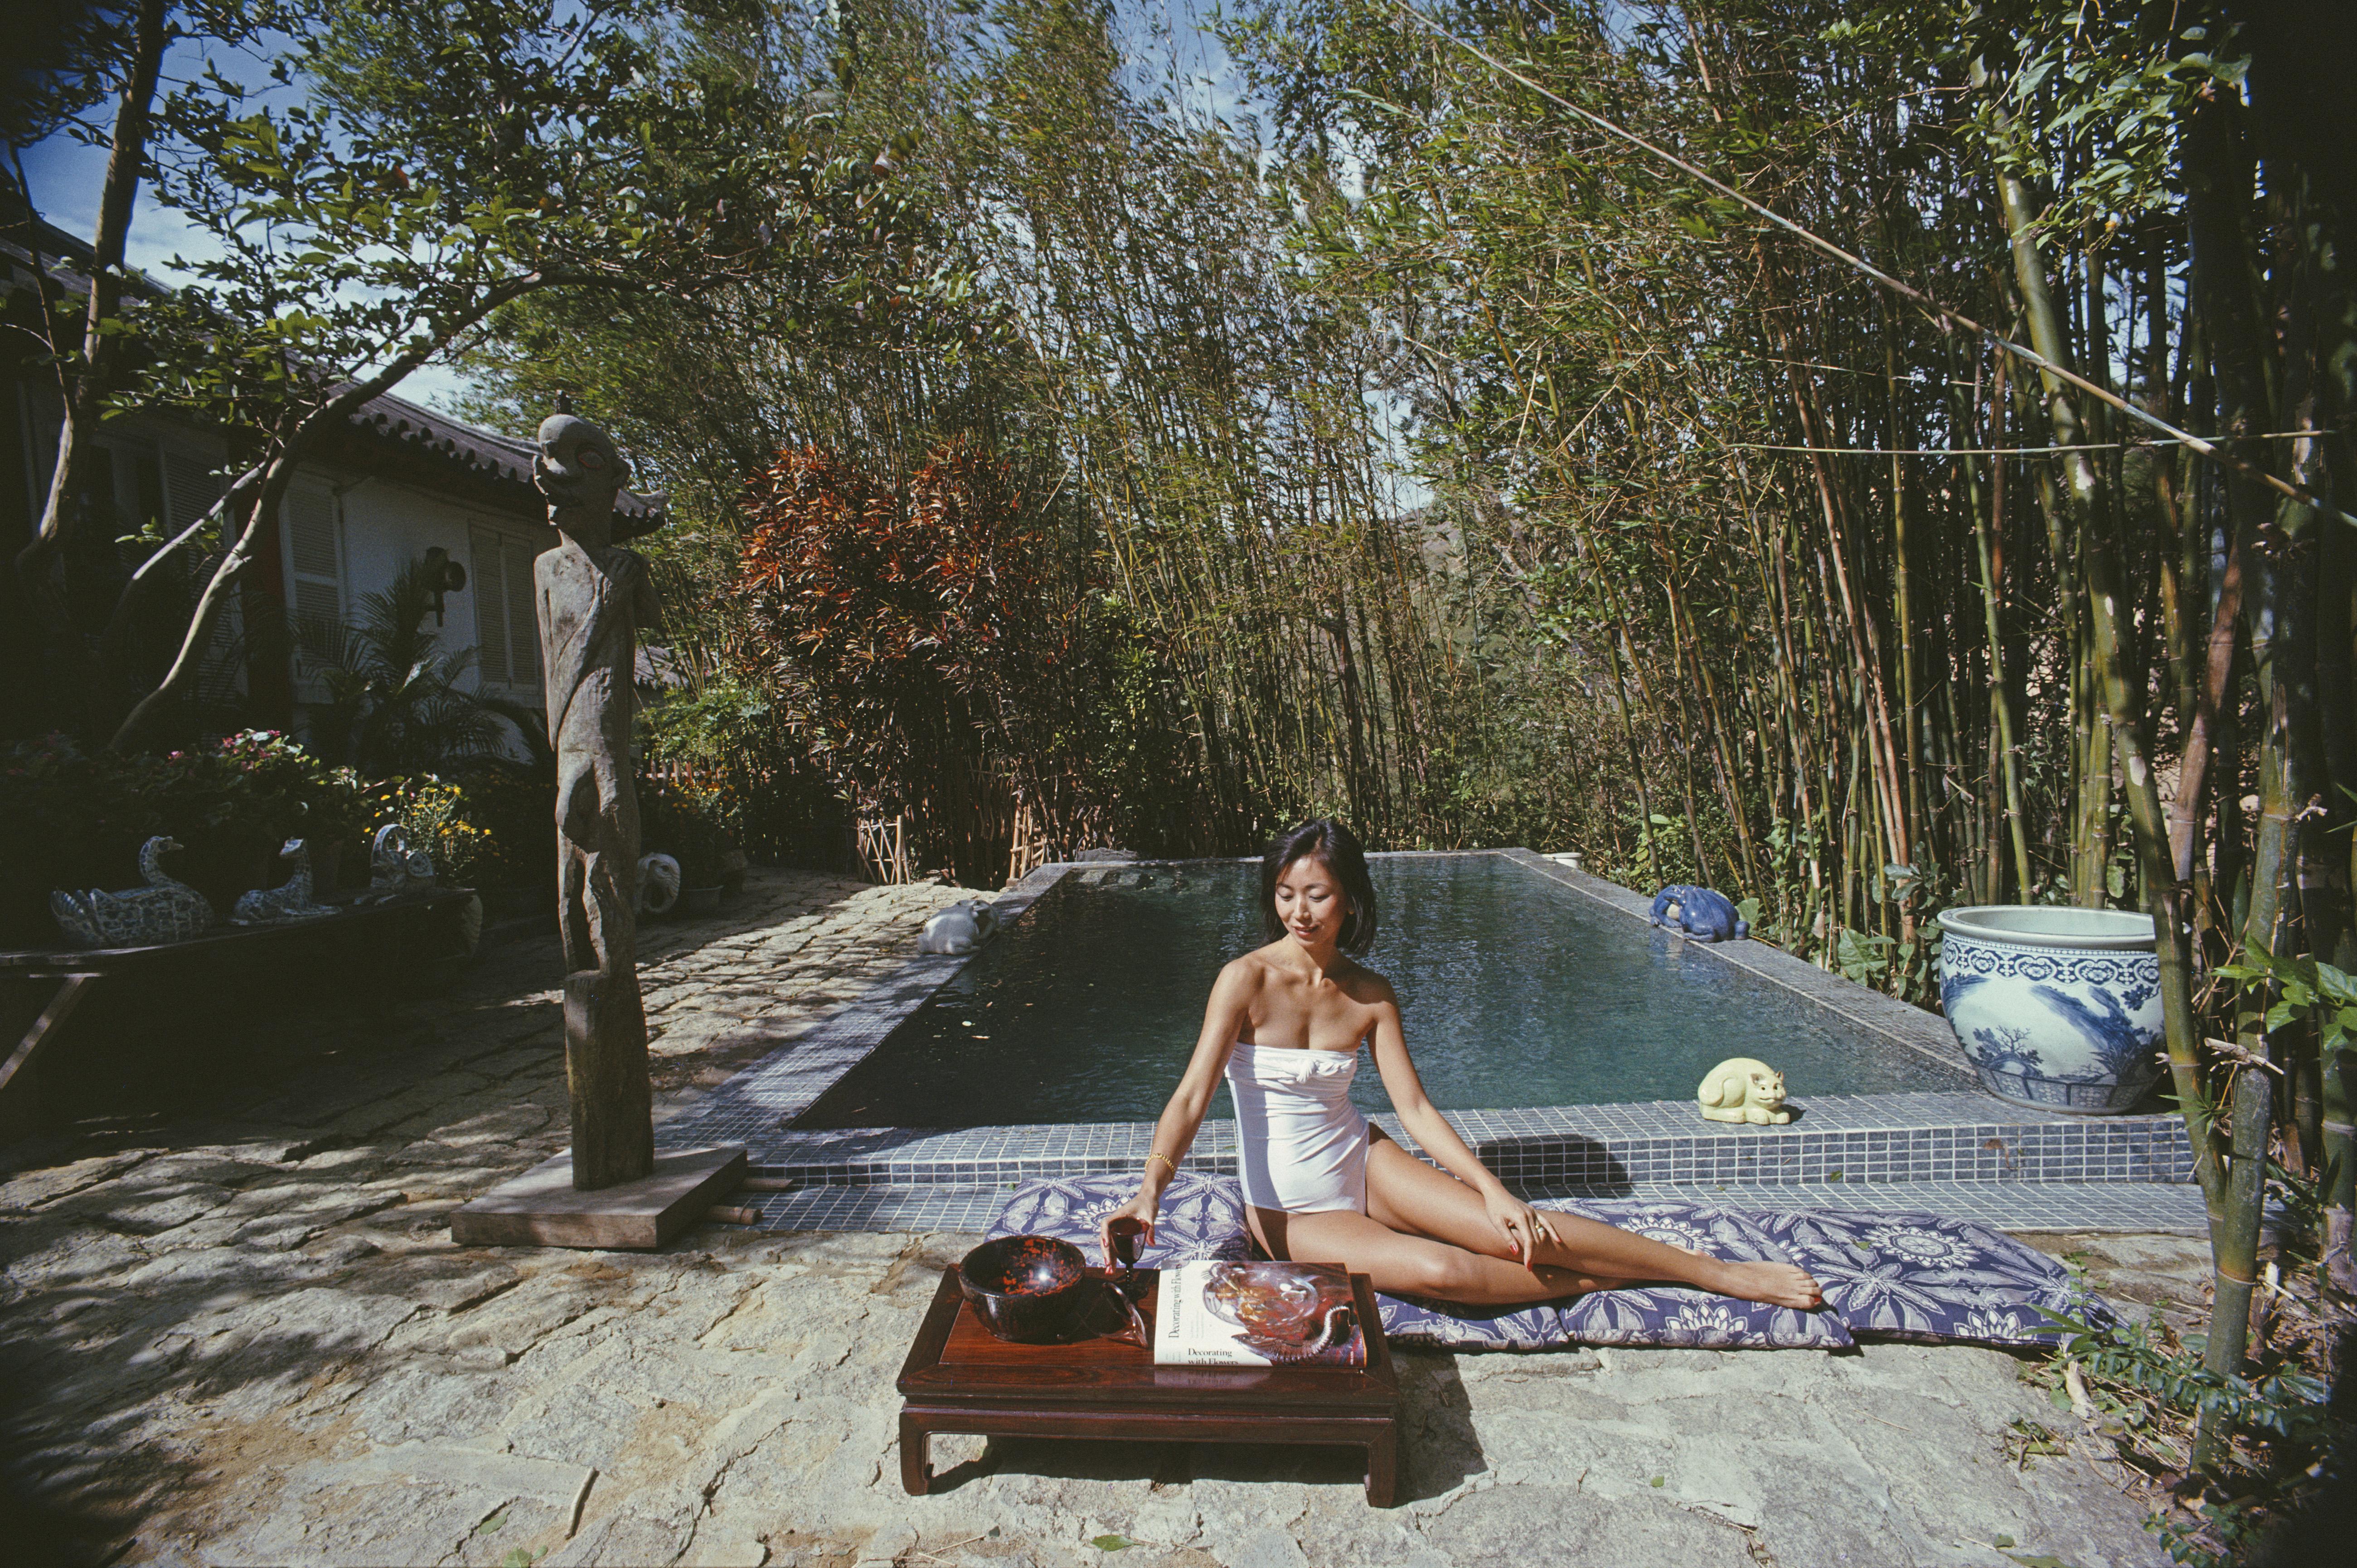 'Cecily Godfrey' 1979 Slim Aarons Limited Estate Edition Print 

Cecily Godfrey relaxes by the pool at her home in Hong Kong, 1979. Her husband Gerald is Vice-President of the Court of Appeal in Hong Kong. 

Produced from the original